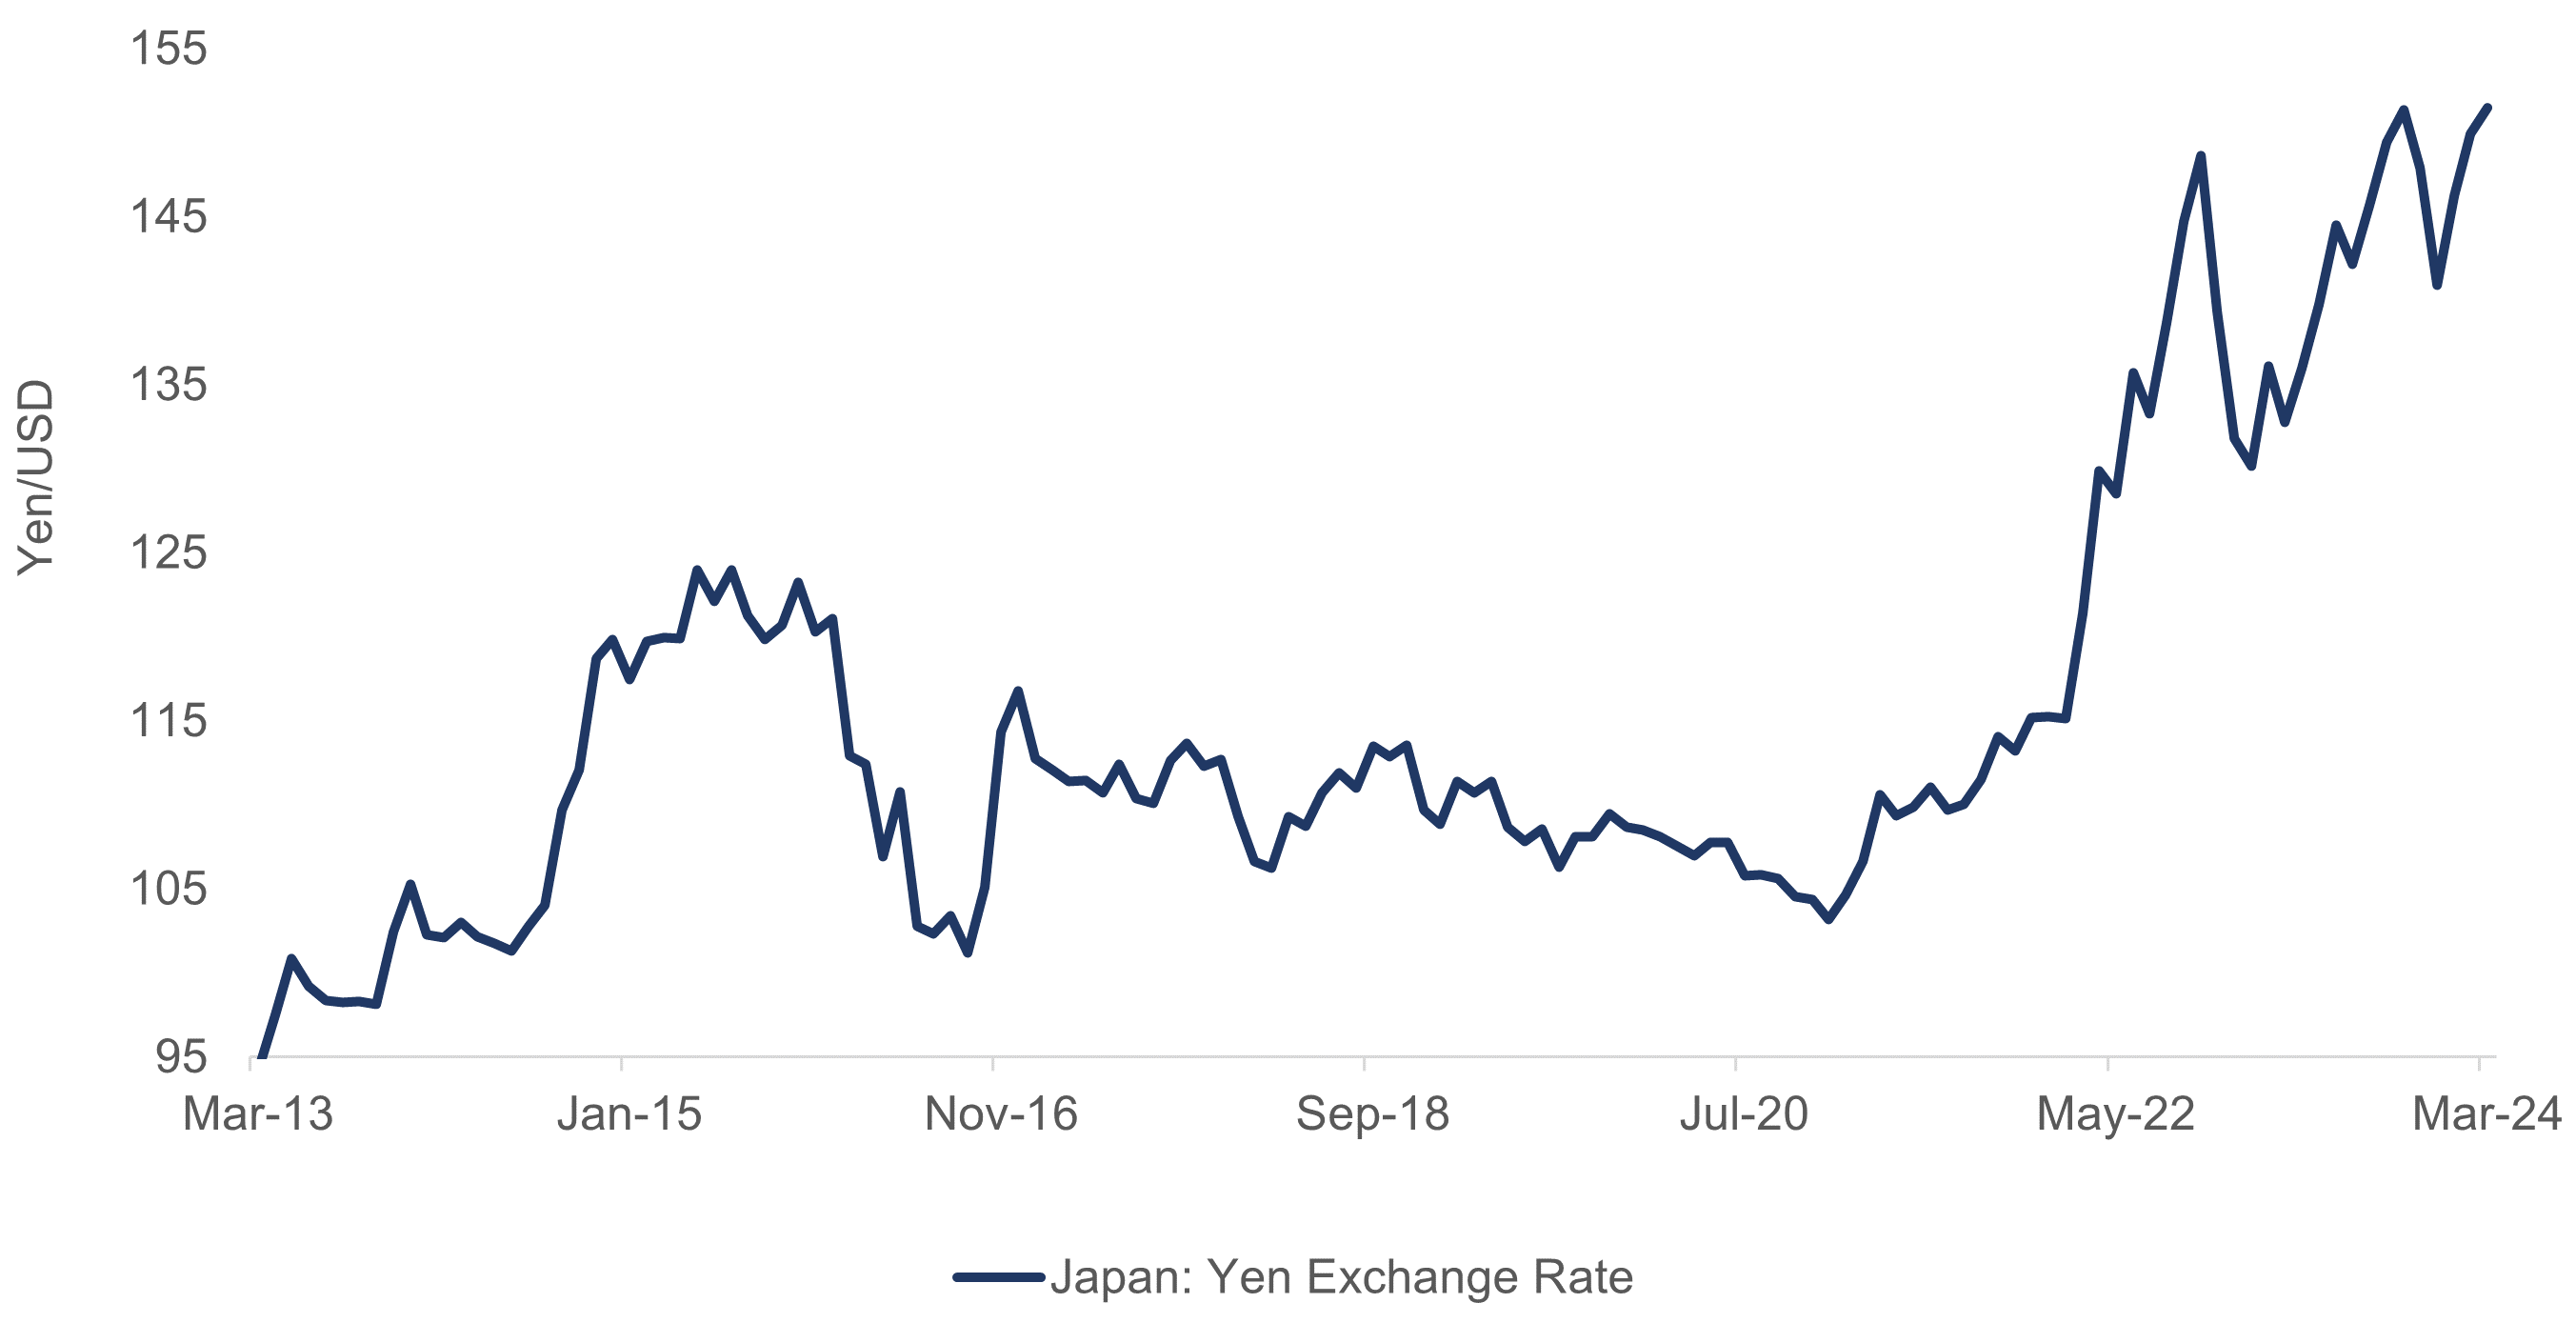 Line graph depicting the weakening yen to U.S. dollar exchange rate from March 2014 to March 2024 as described in the preceding paragraph.